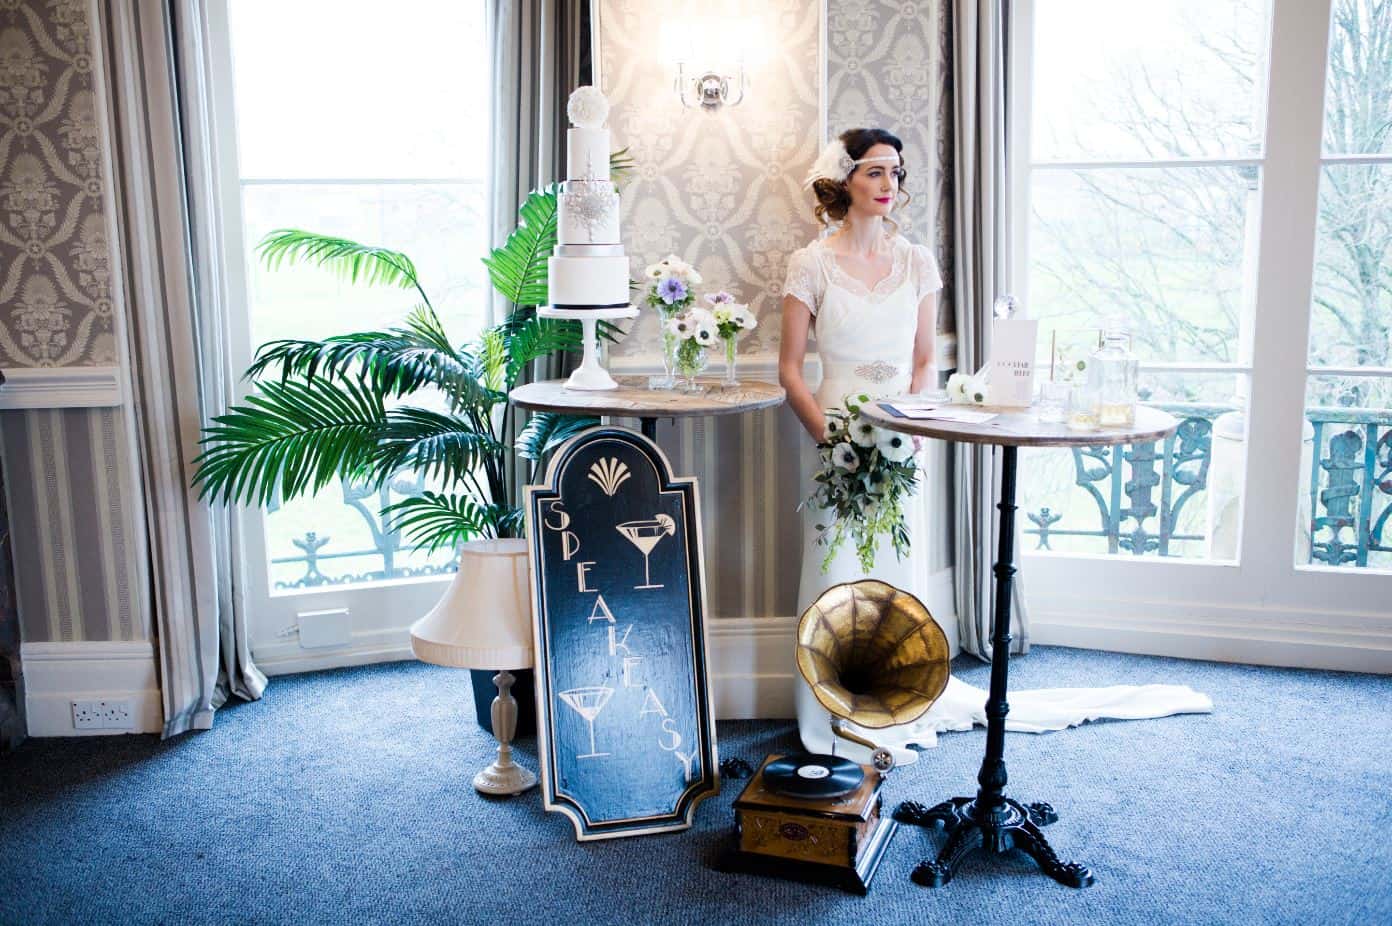 Bride with 1920s inspired gramophone and signage wedding props